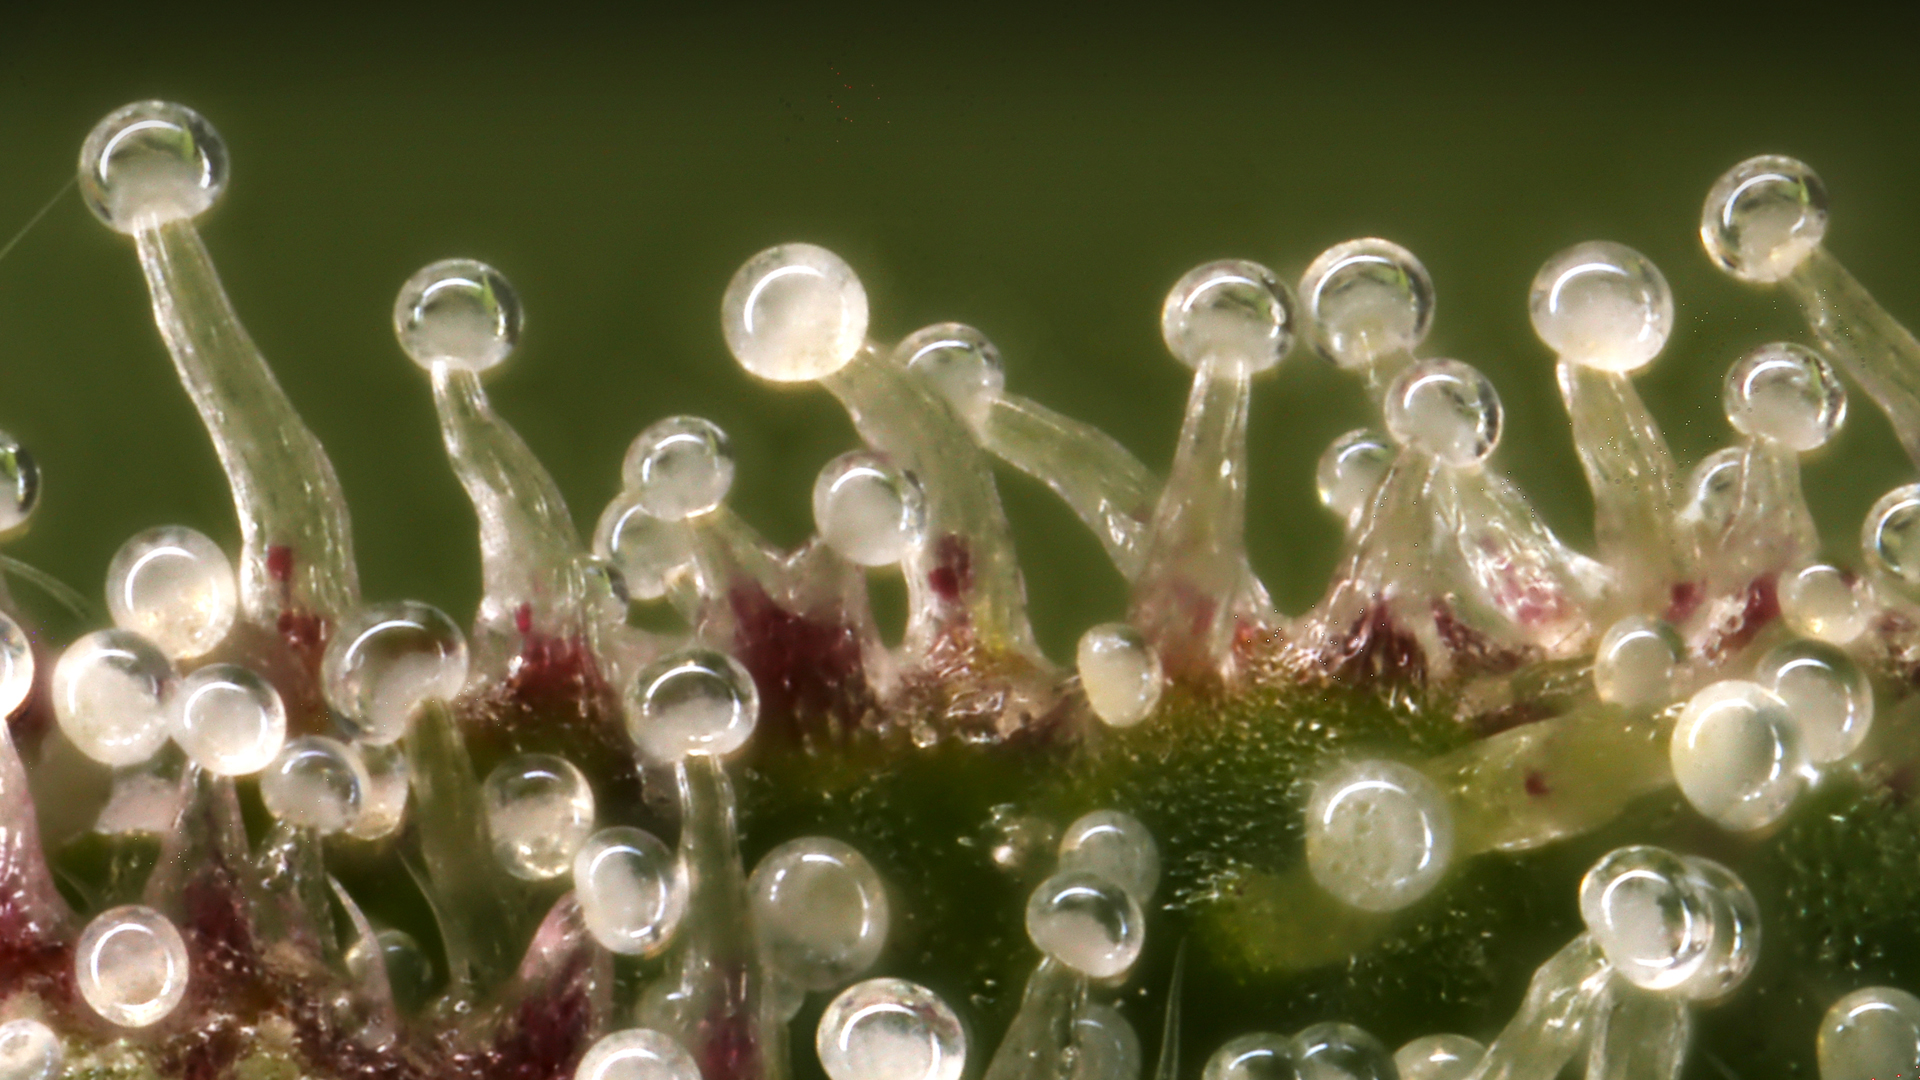 Cannabis trichomes: what are they?